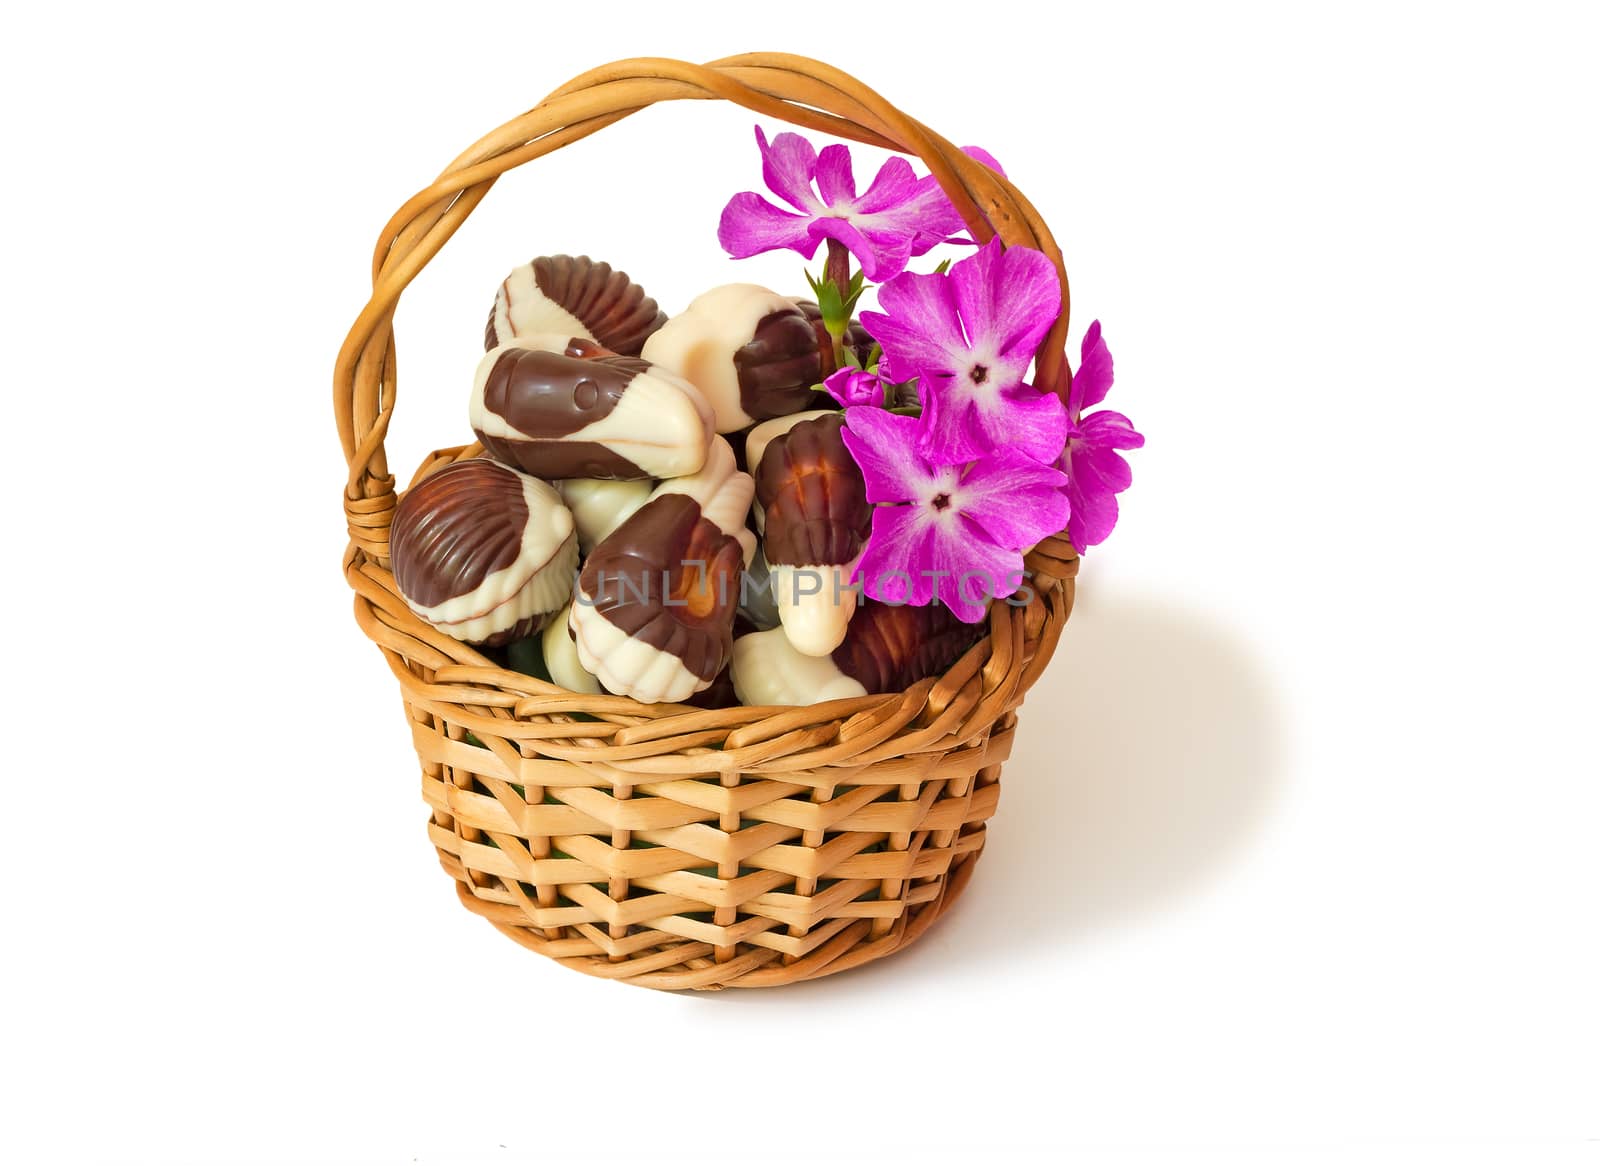 Chocolates in a wattled basket on a white background. by georgina198